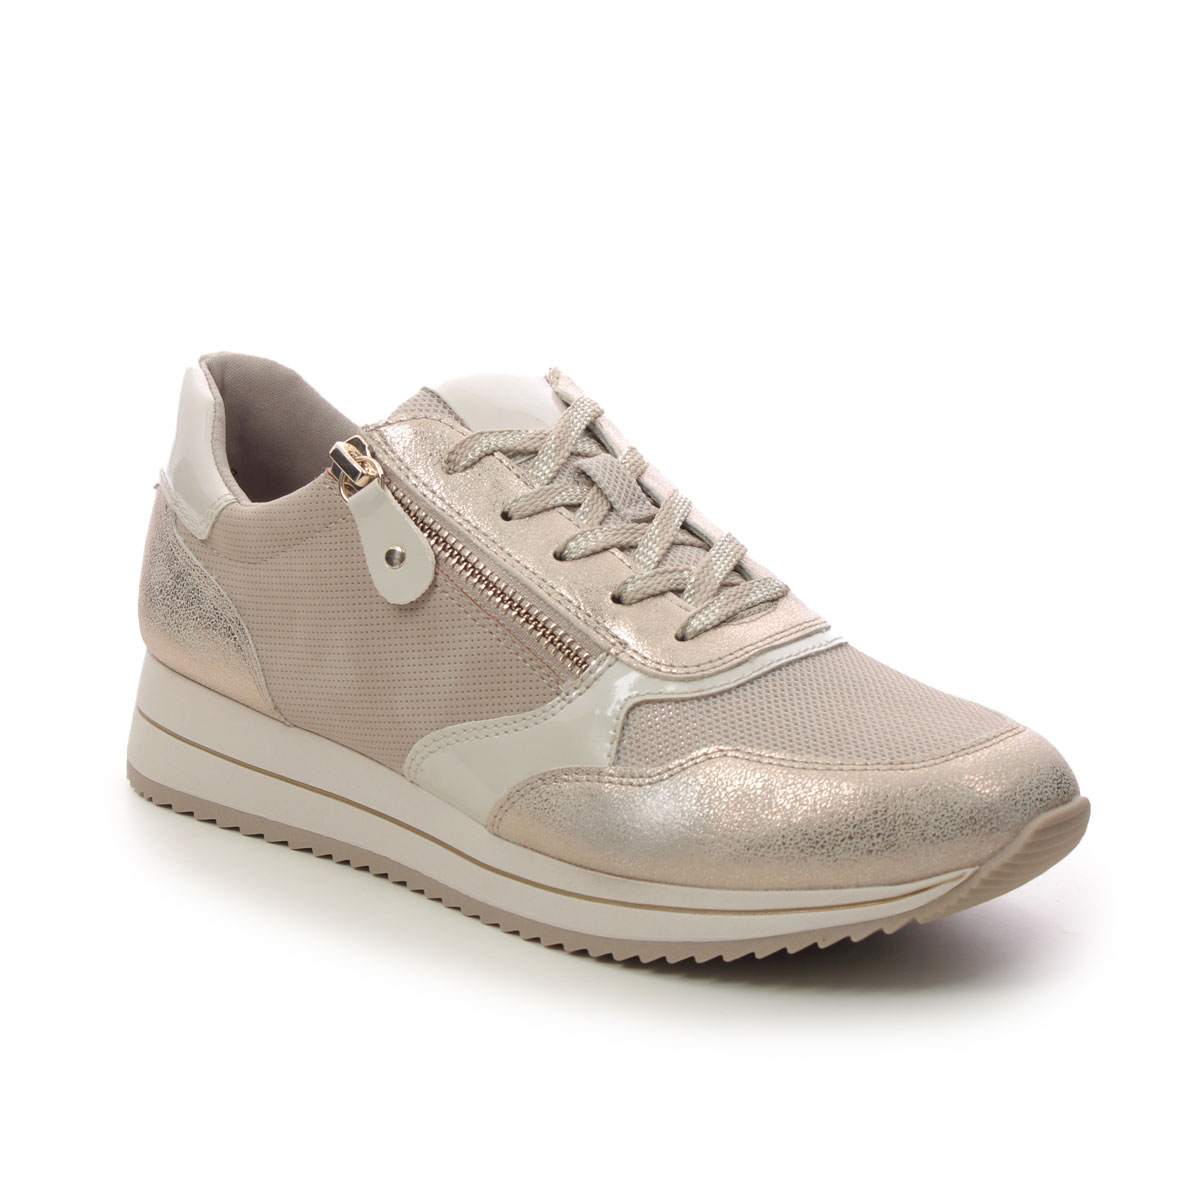 Jana Lulea Wide Gold Womens trainers 23763-42-499 in a Plain Man-made in Size 37